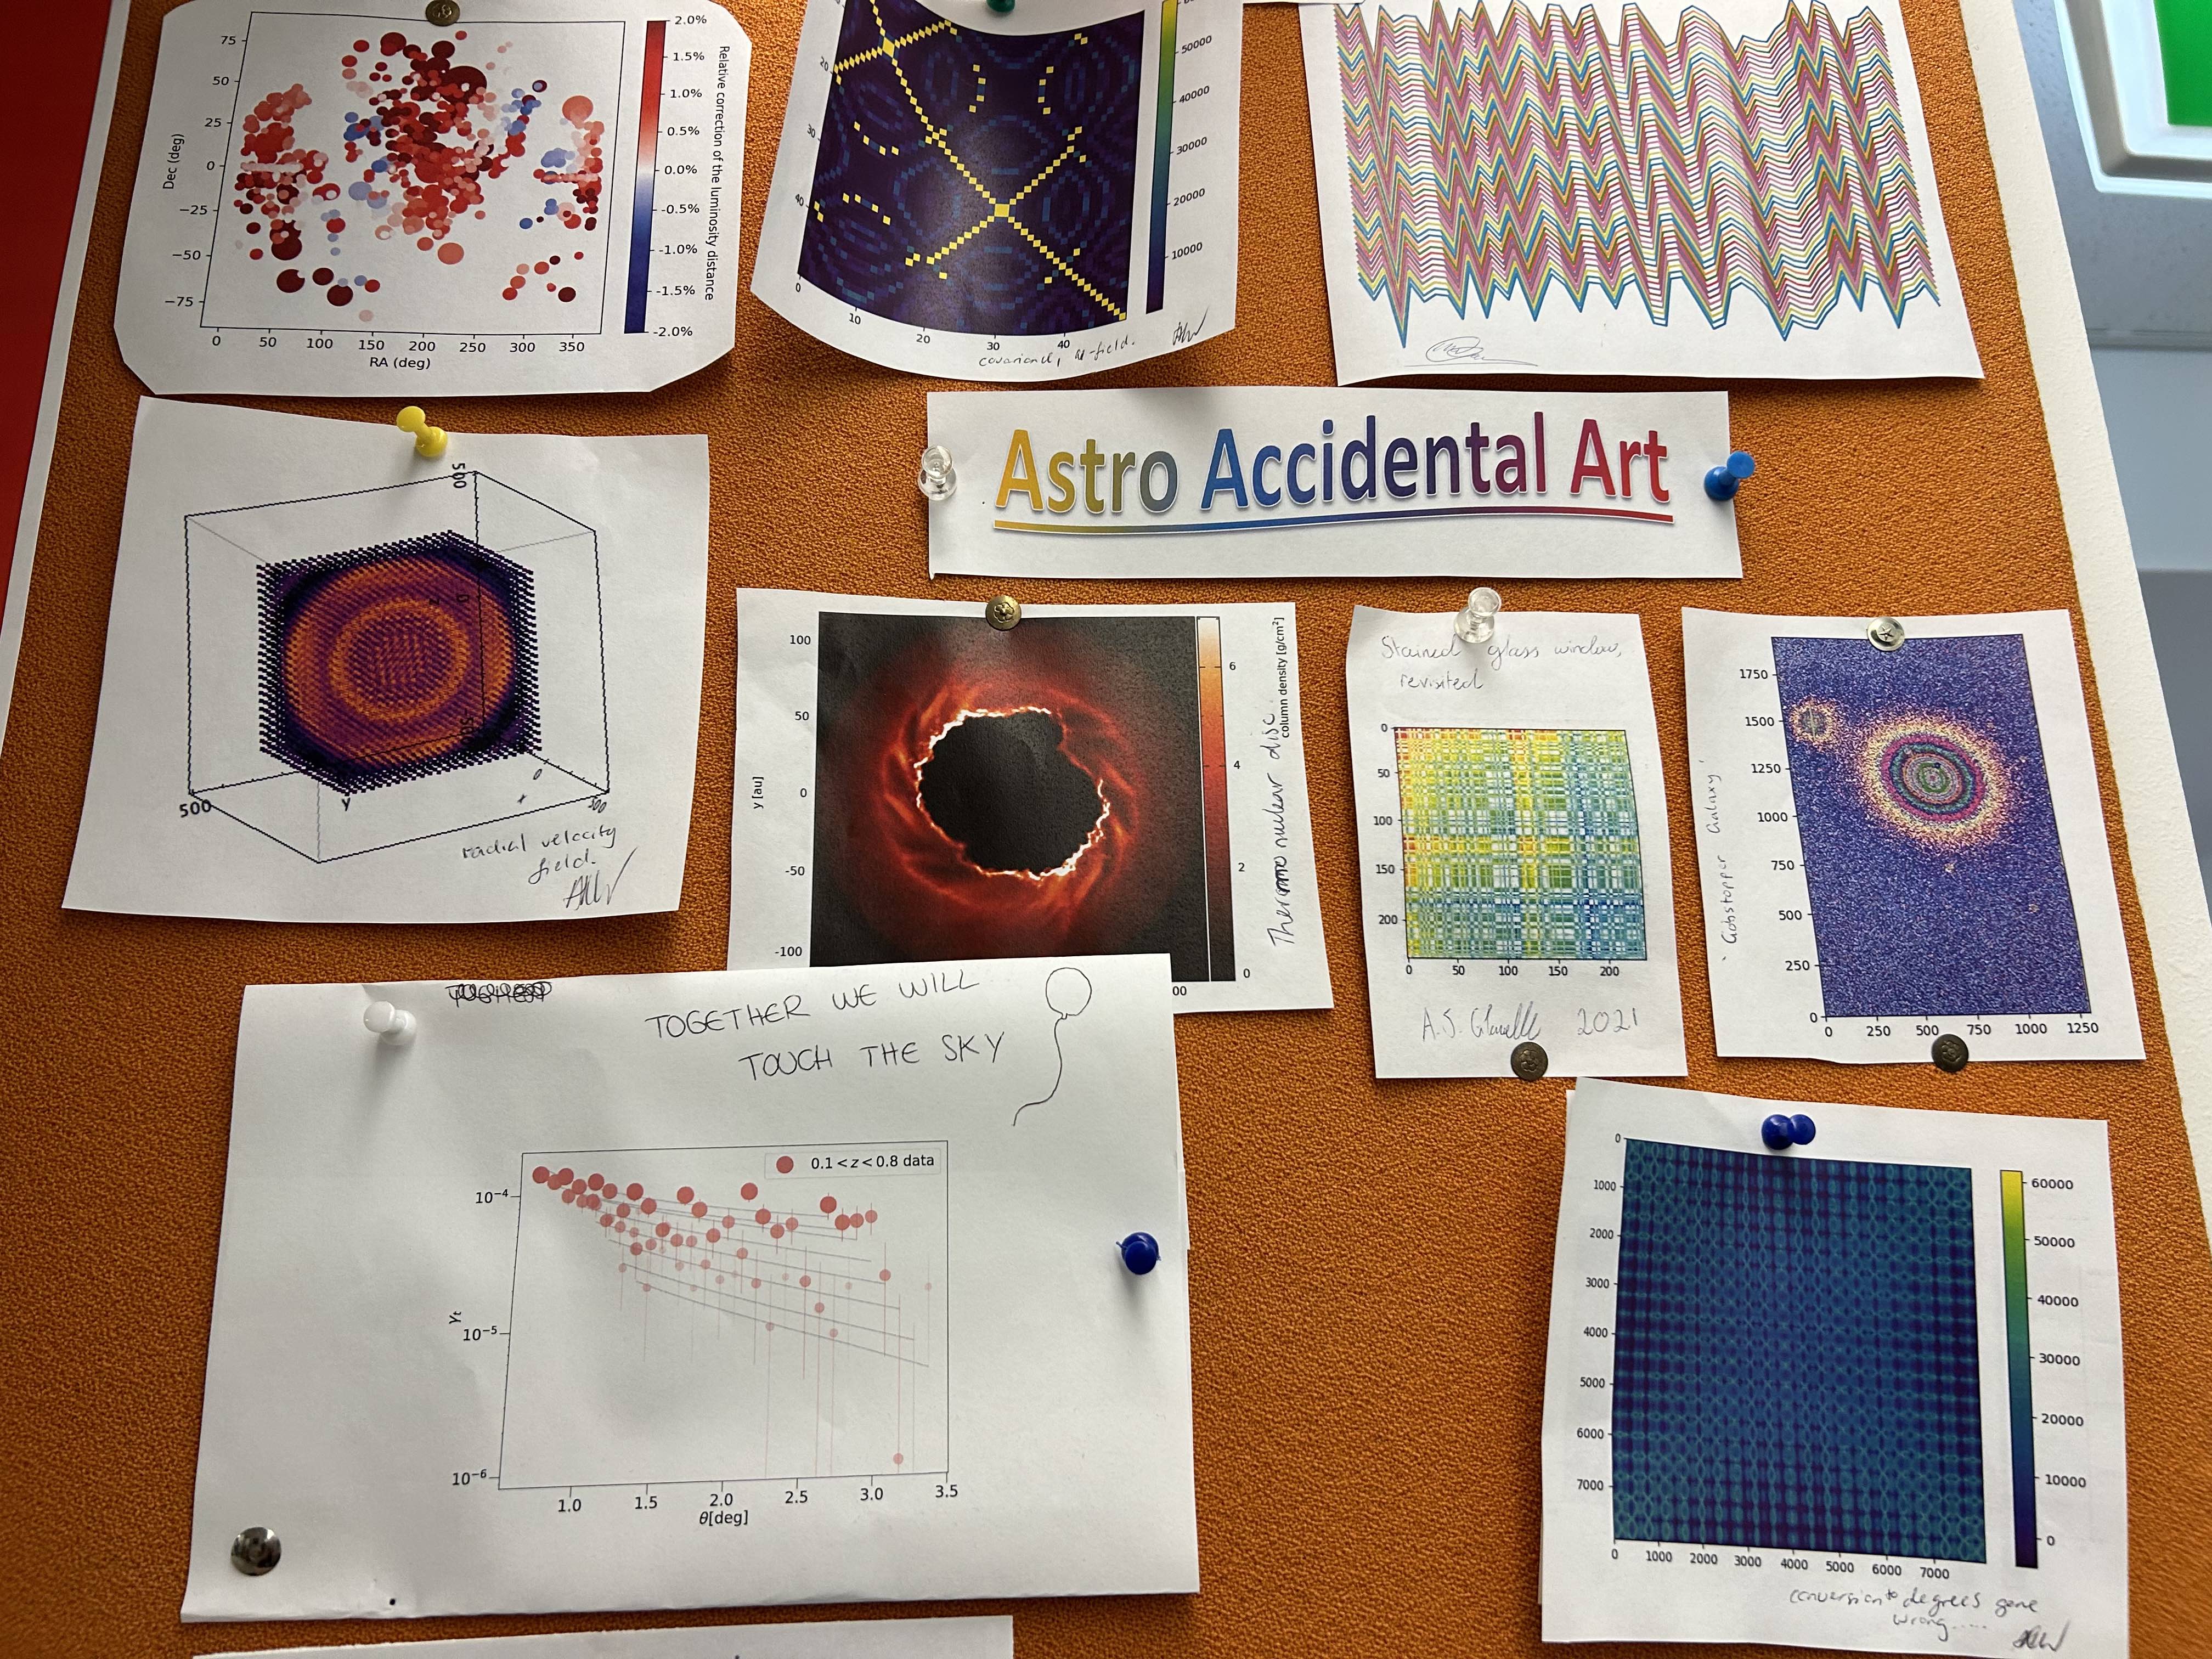 Art by the Astro team. A picture of graphs and images with the title 'Accidental Astro Art'